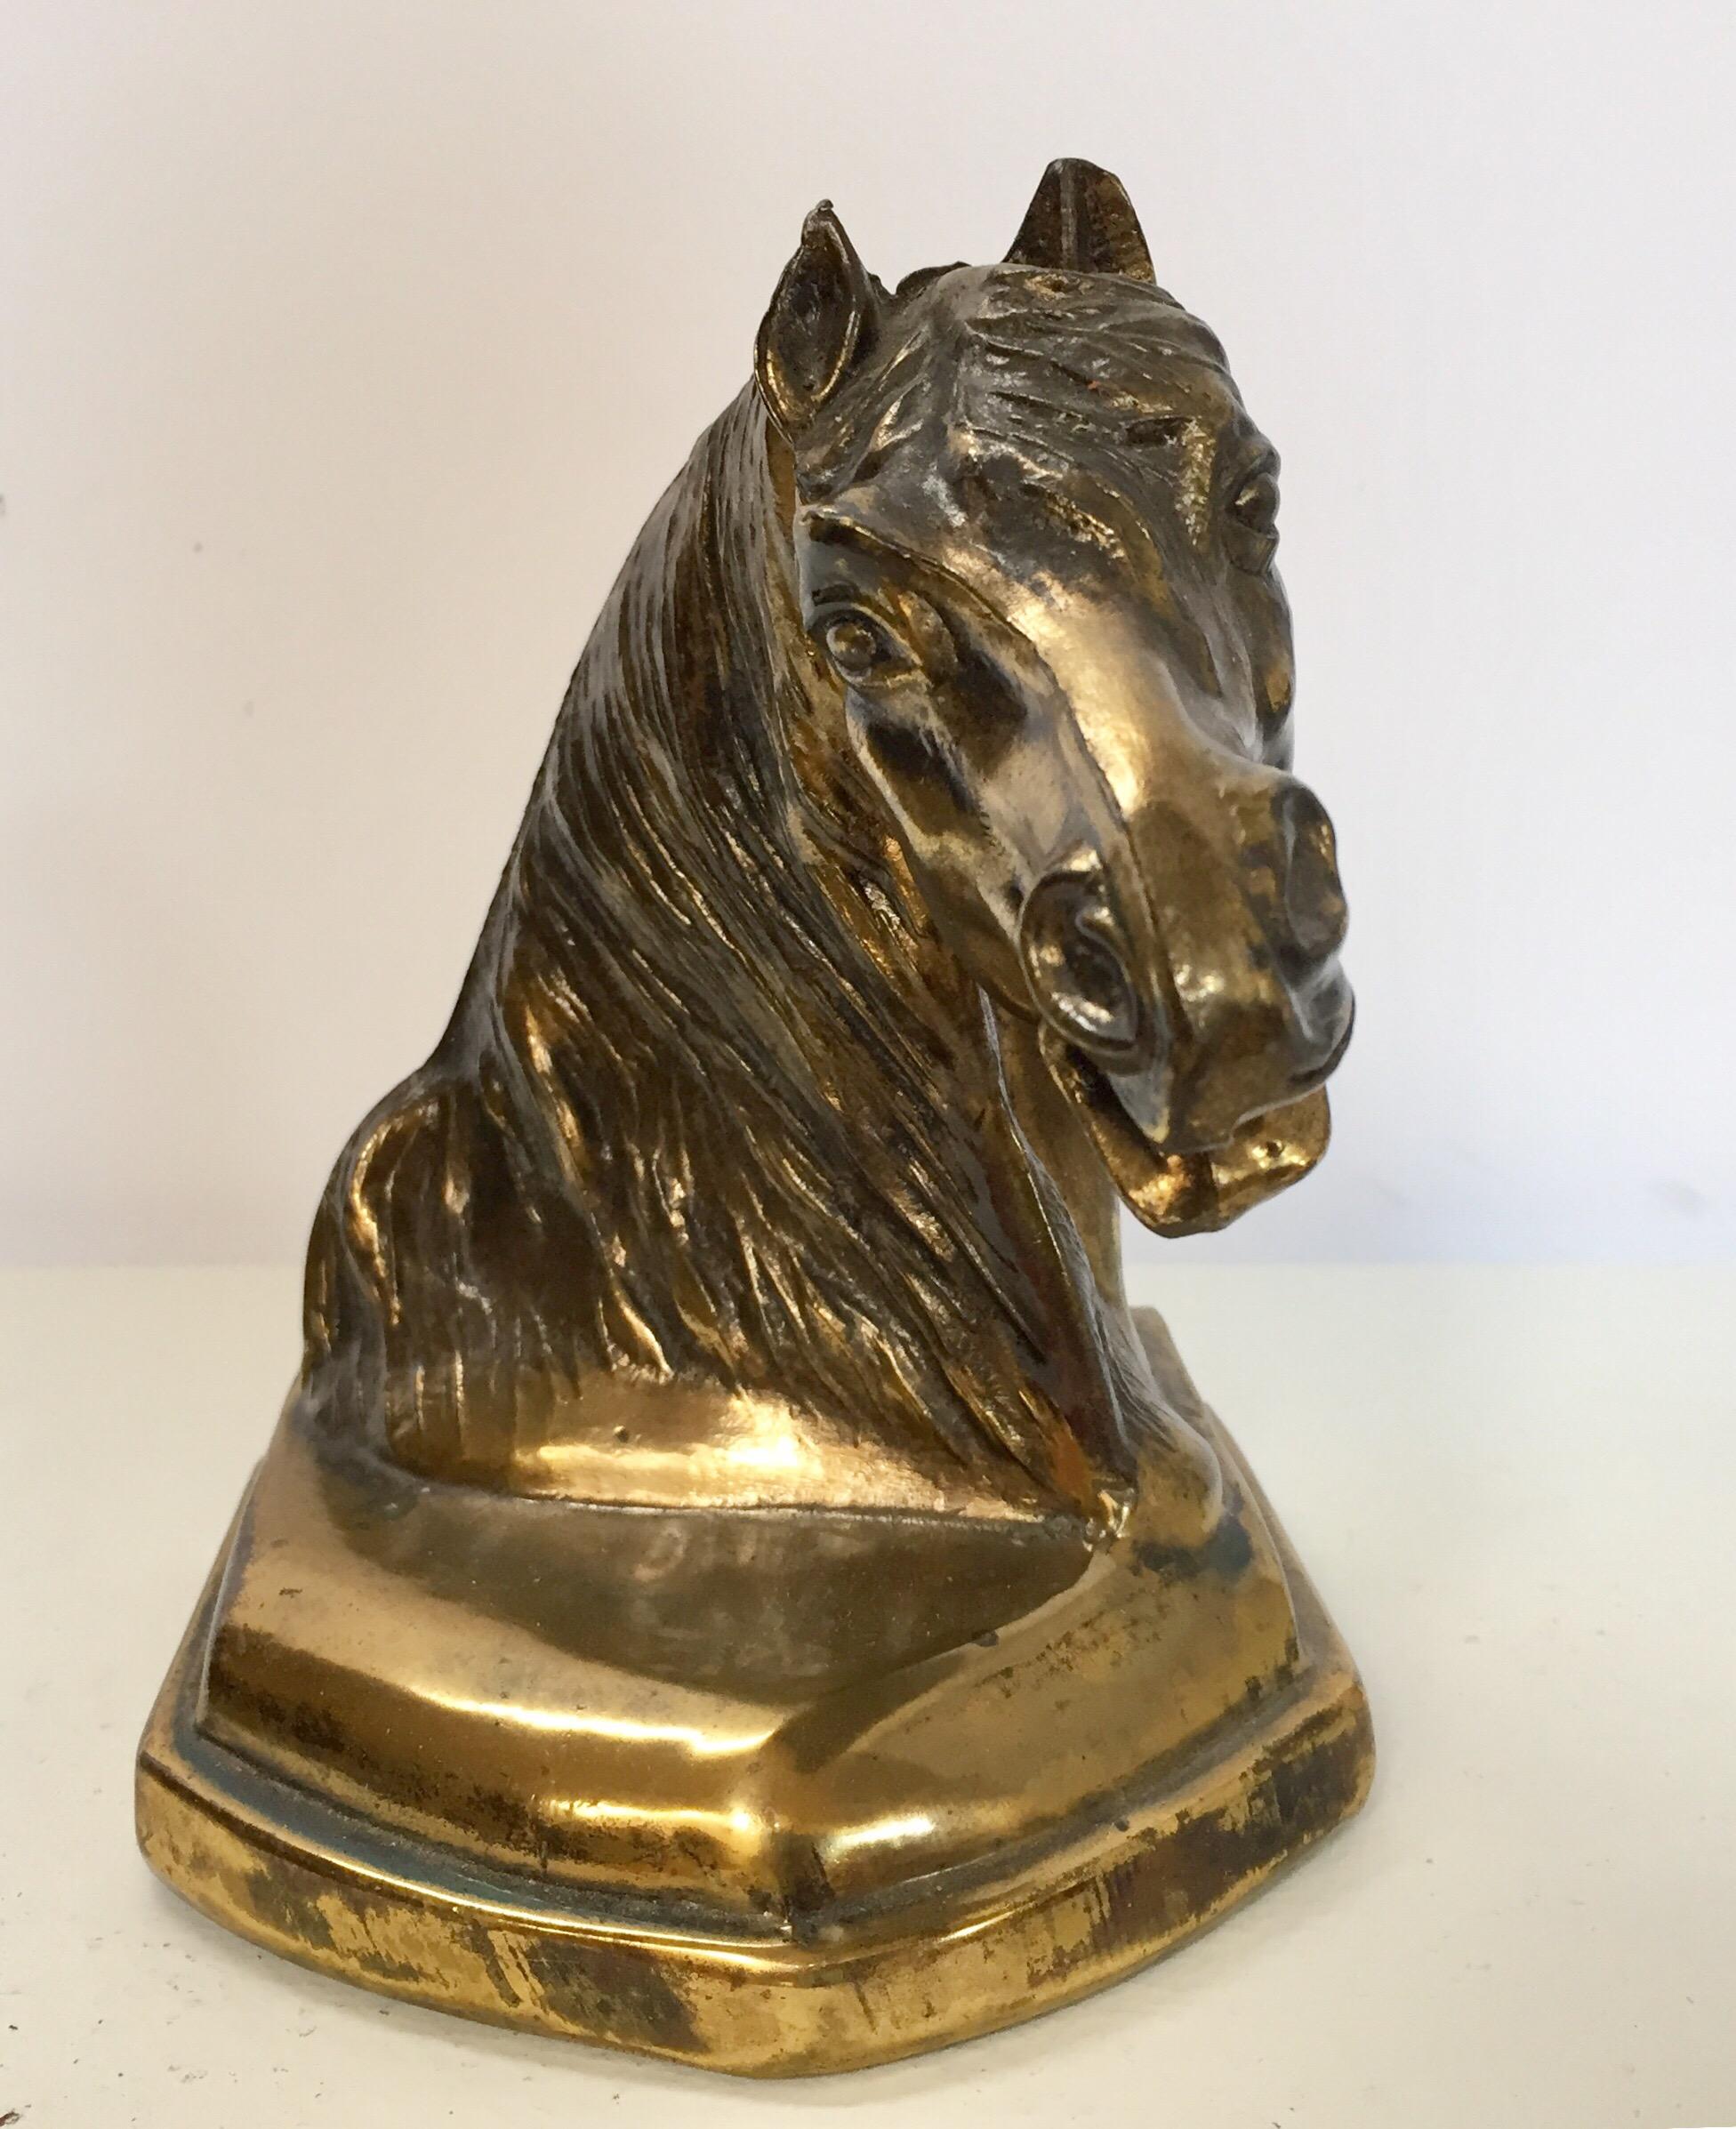 Cast polished brass horse head bust sculpture, great to use on a desk as a paper weight or decorative object around the house or office.
Nice patina.
Measure: 6